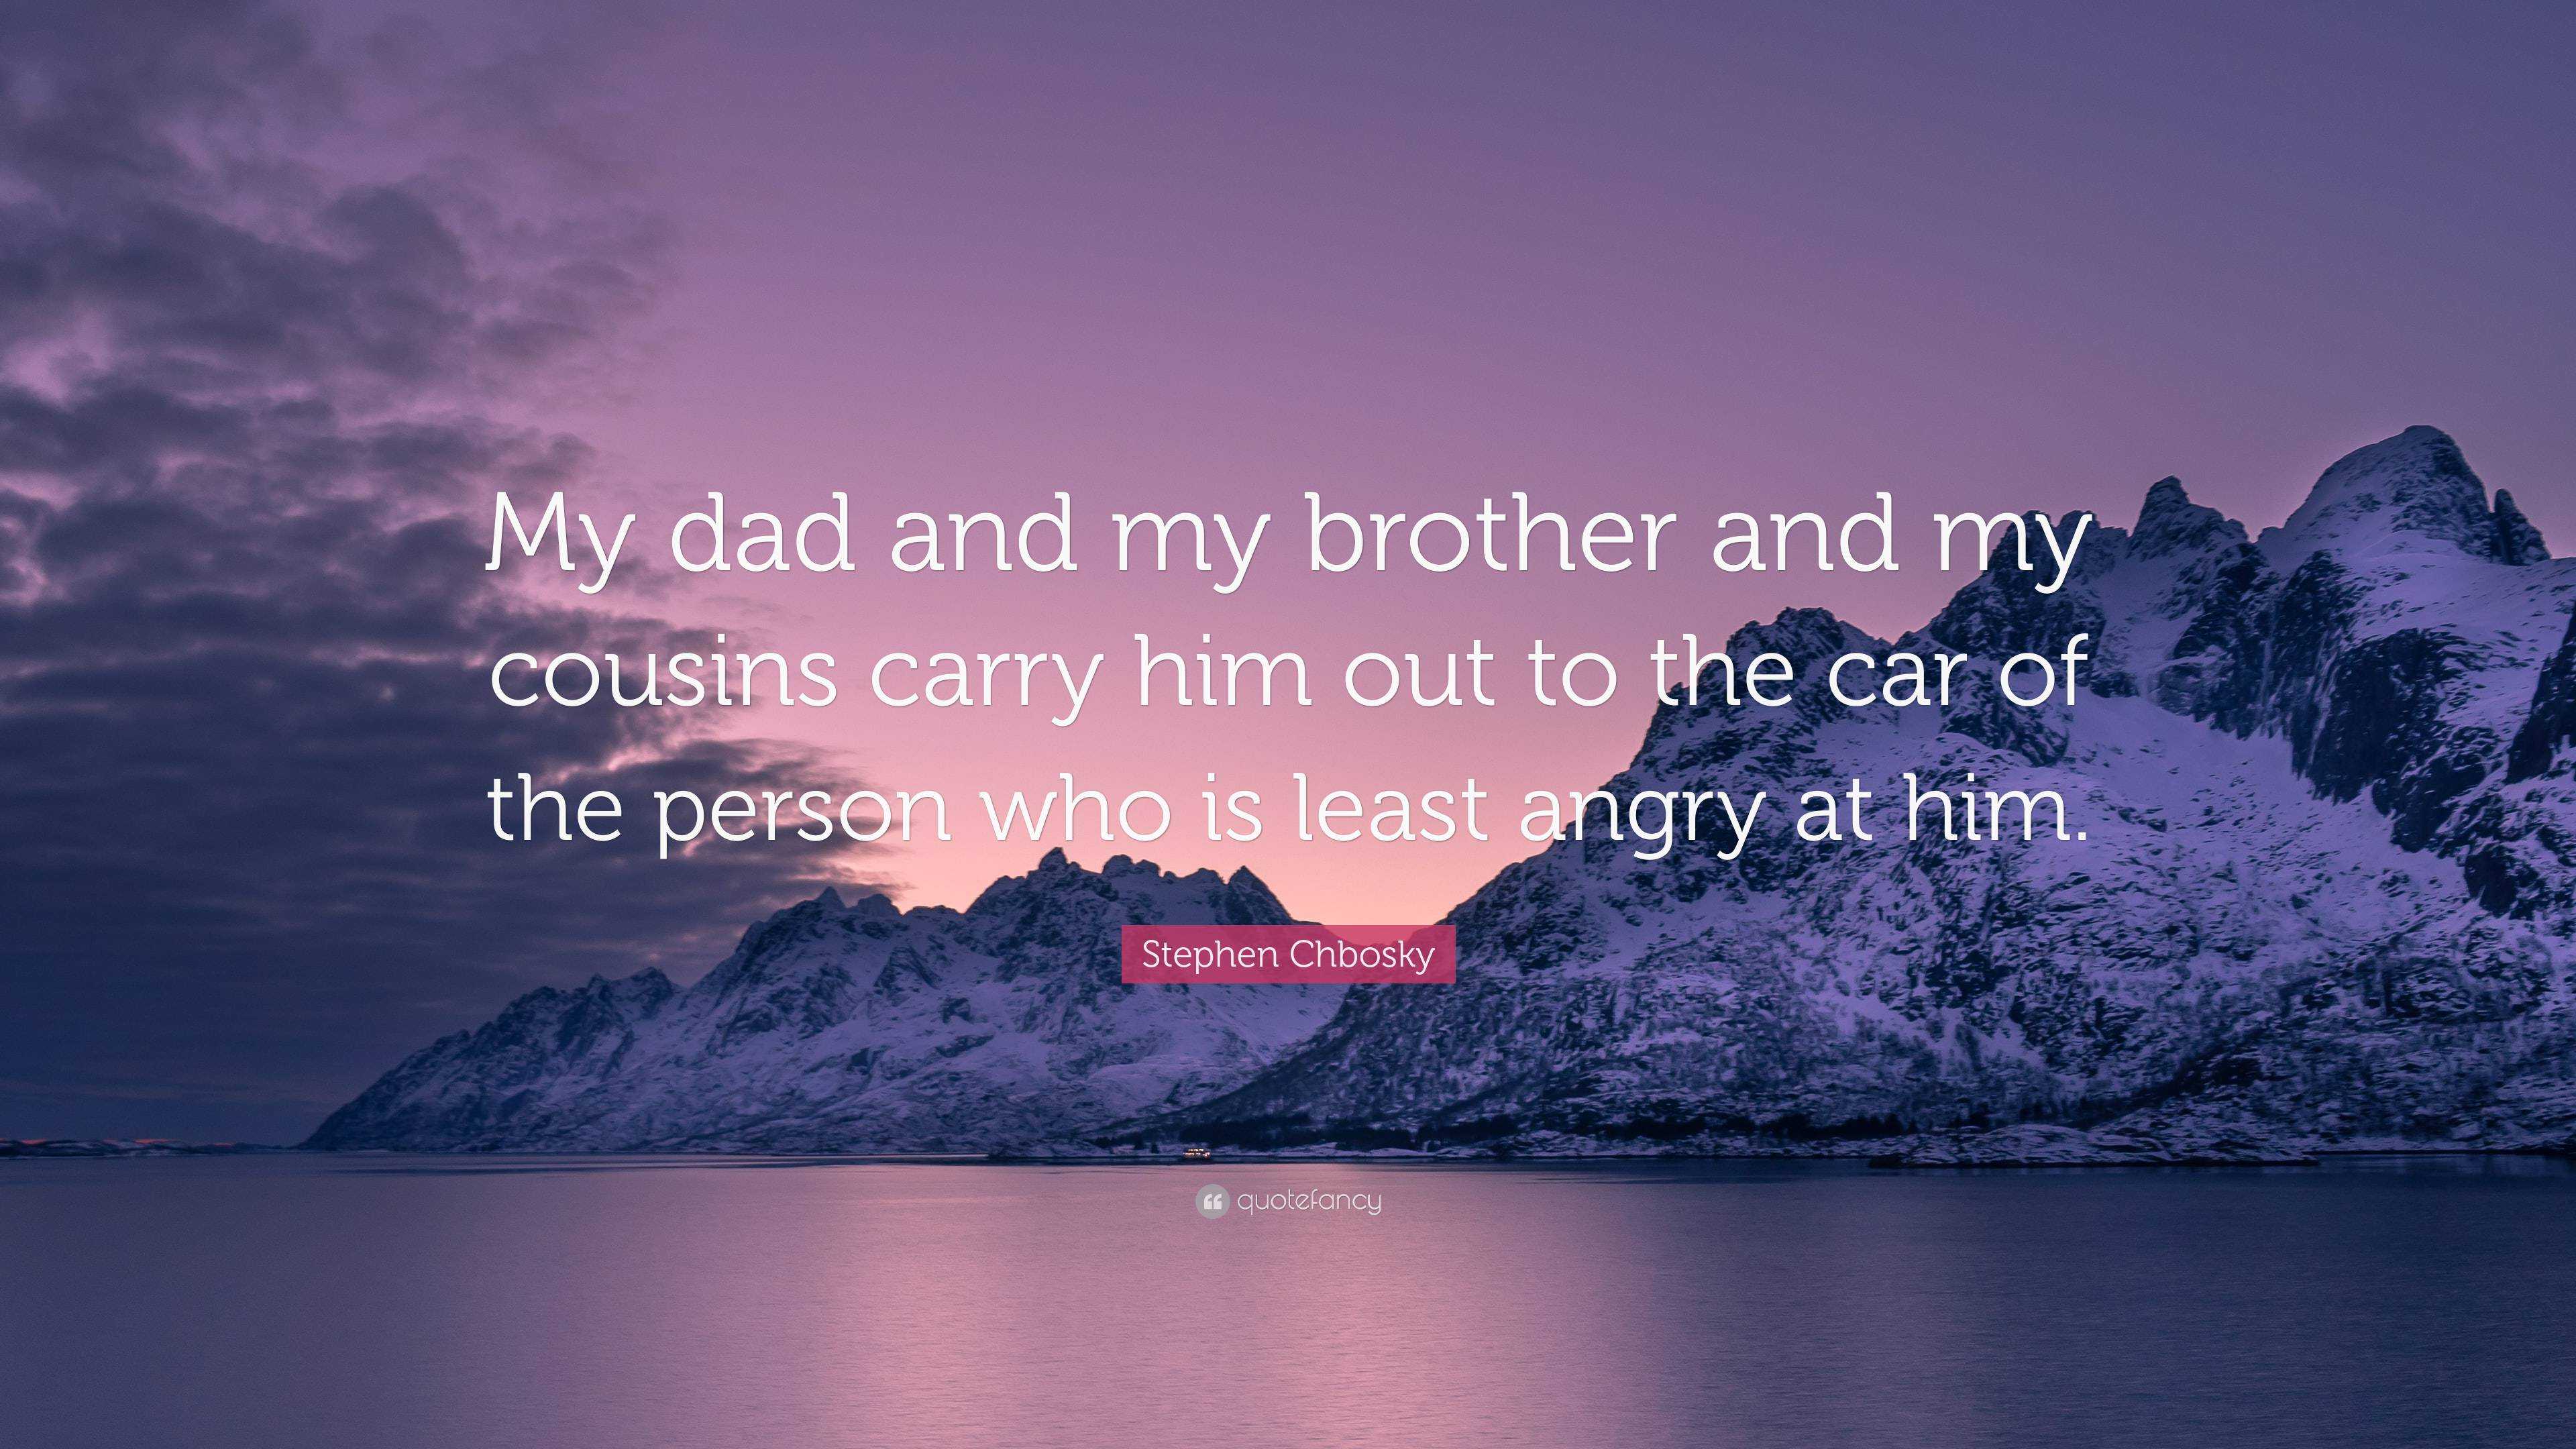 Stephen Chbosky Quote “my Dad And My Brother And My Cousins Carry Him Out To The Car Of The